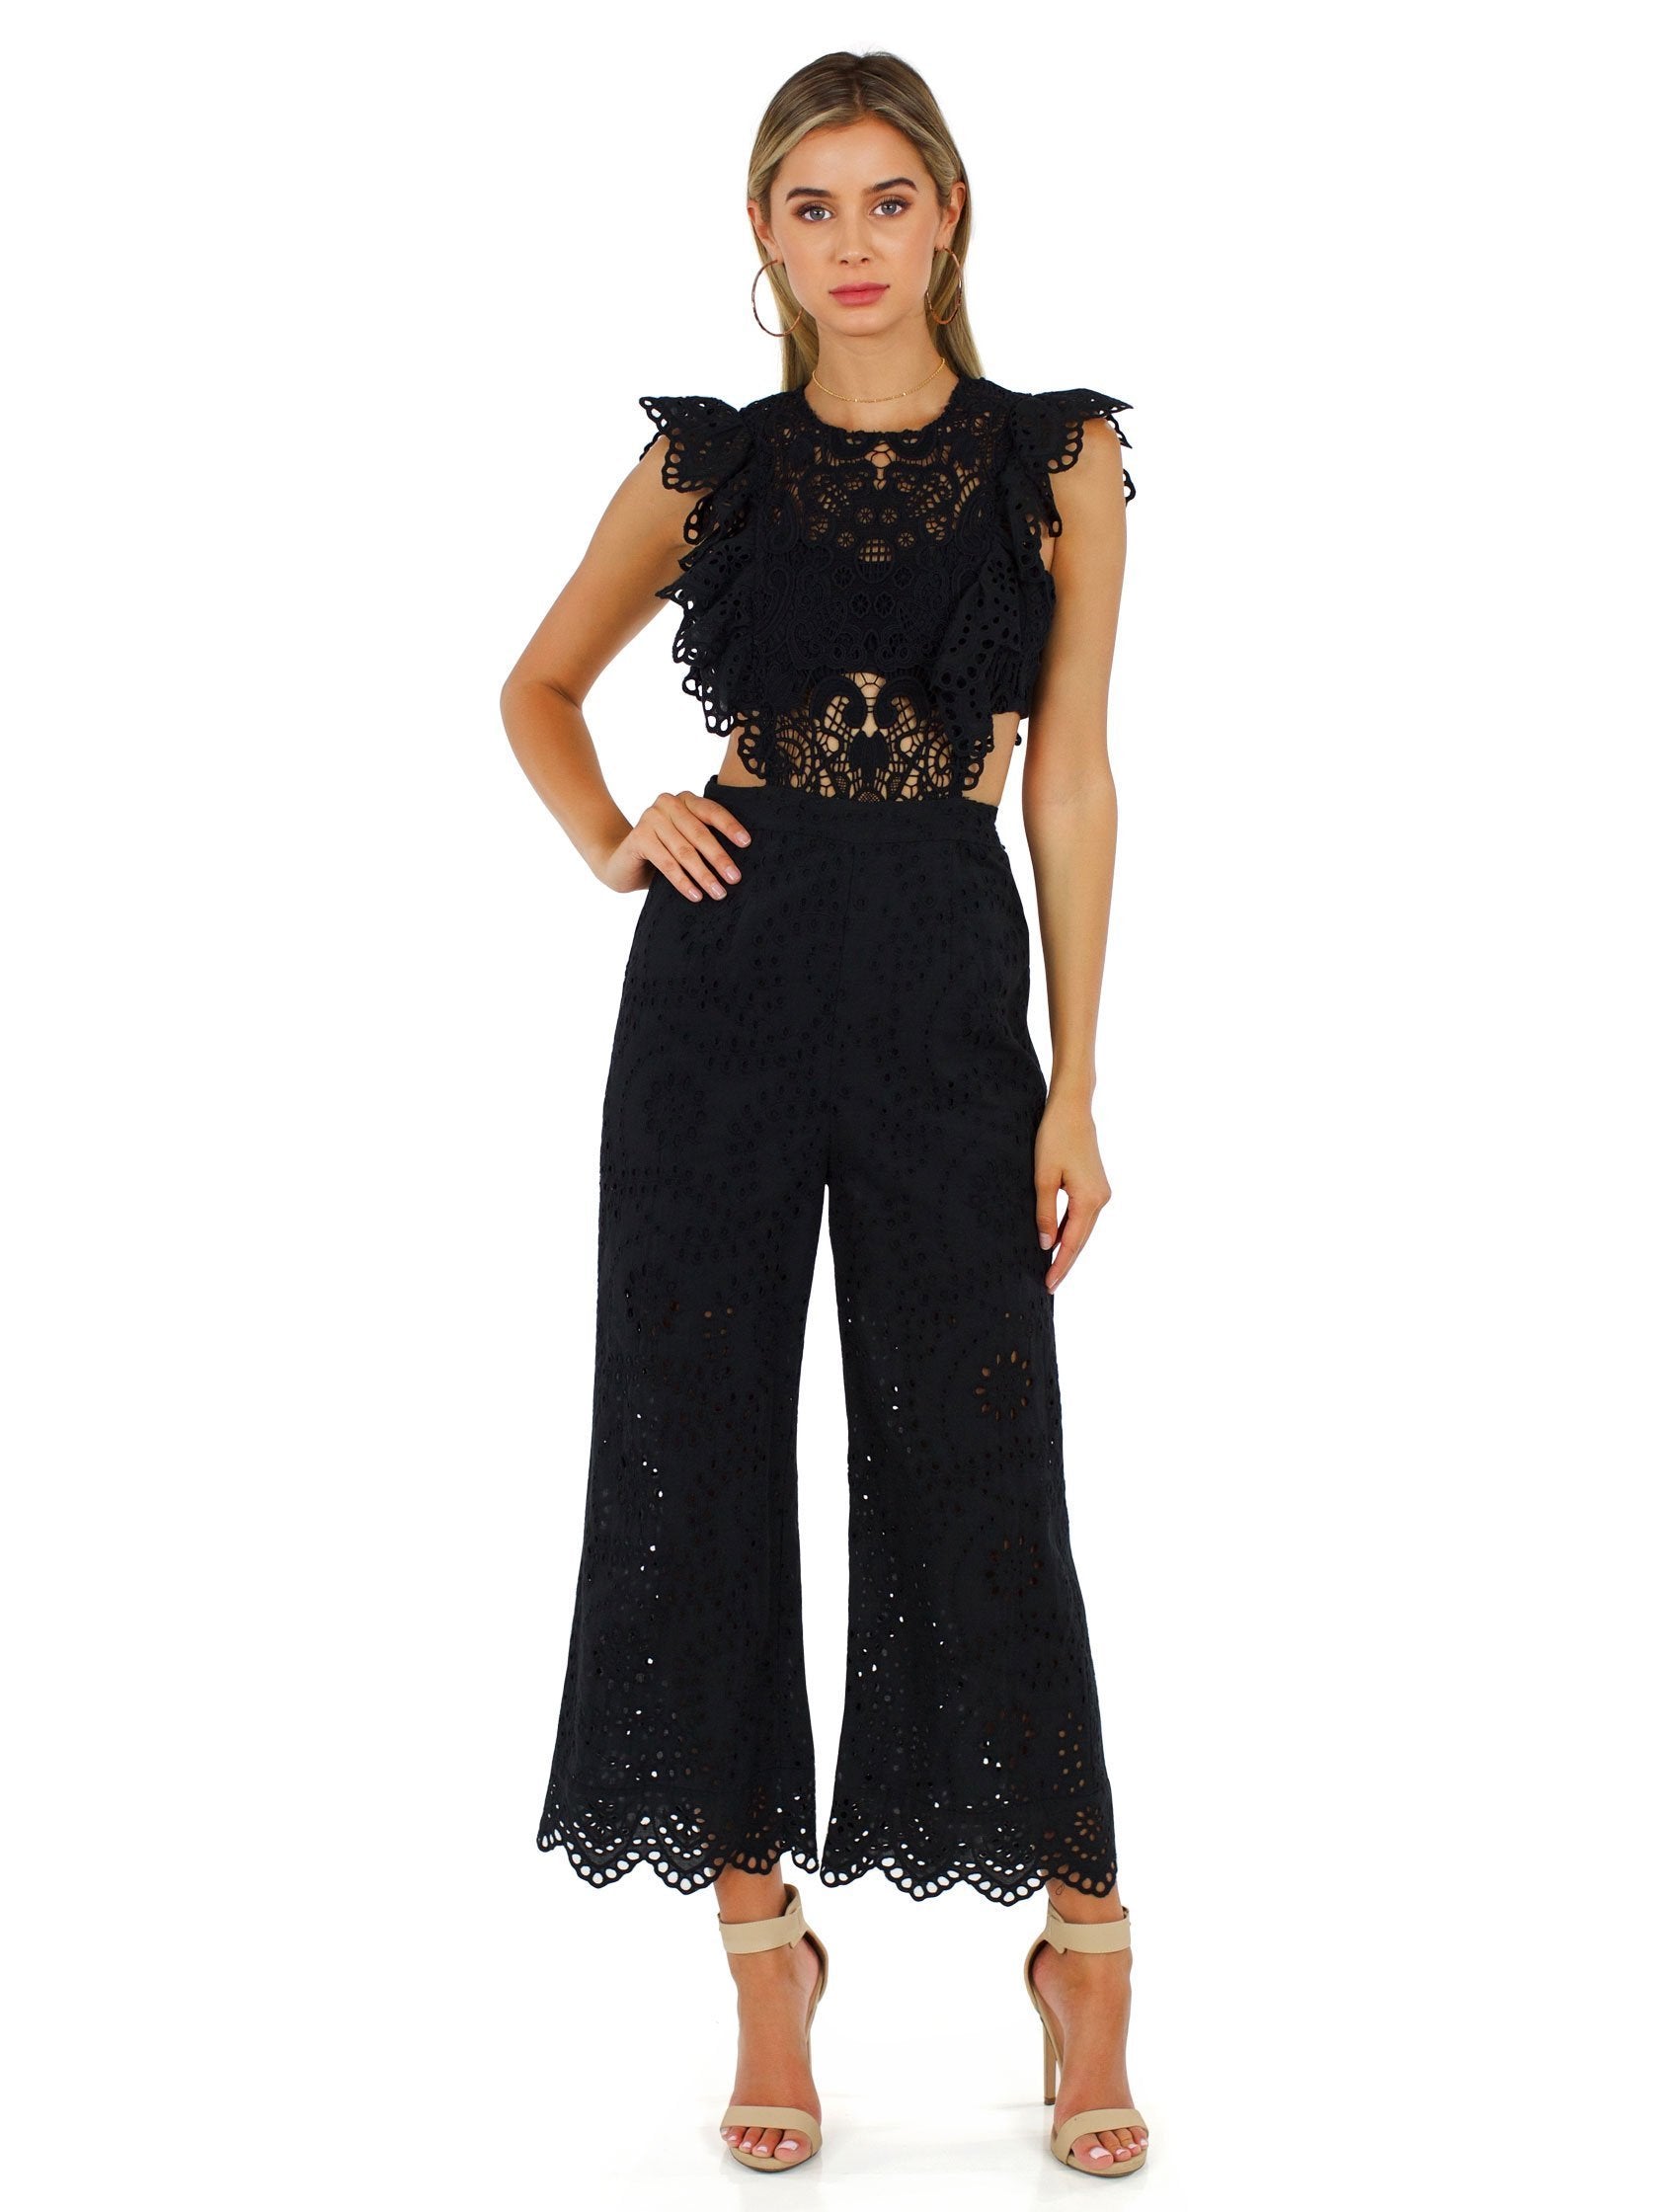 Girl outfit in a jumpsuit rental from Nightcap Clothing called Eyelet Apron Jumpsuit